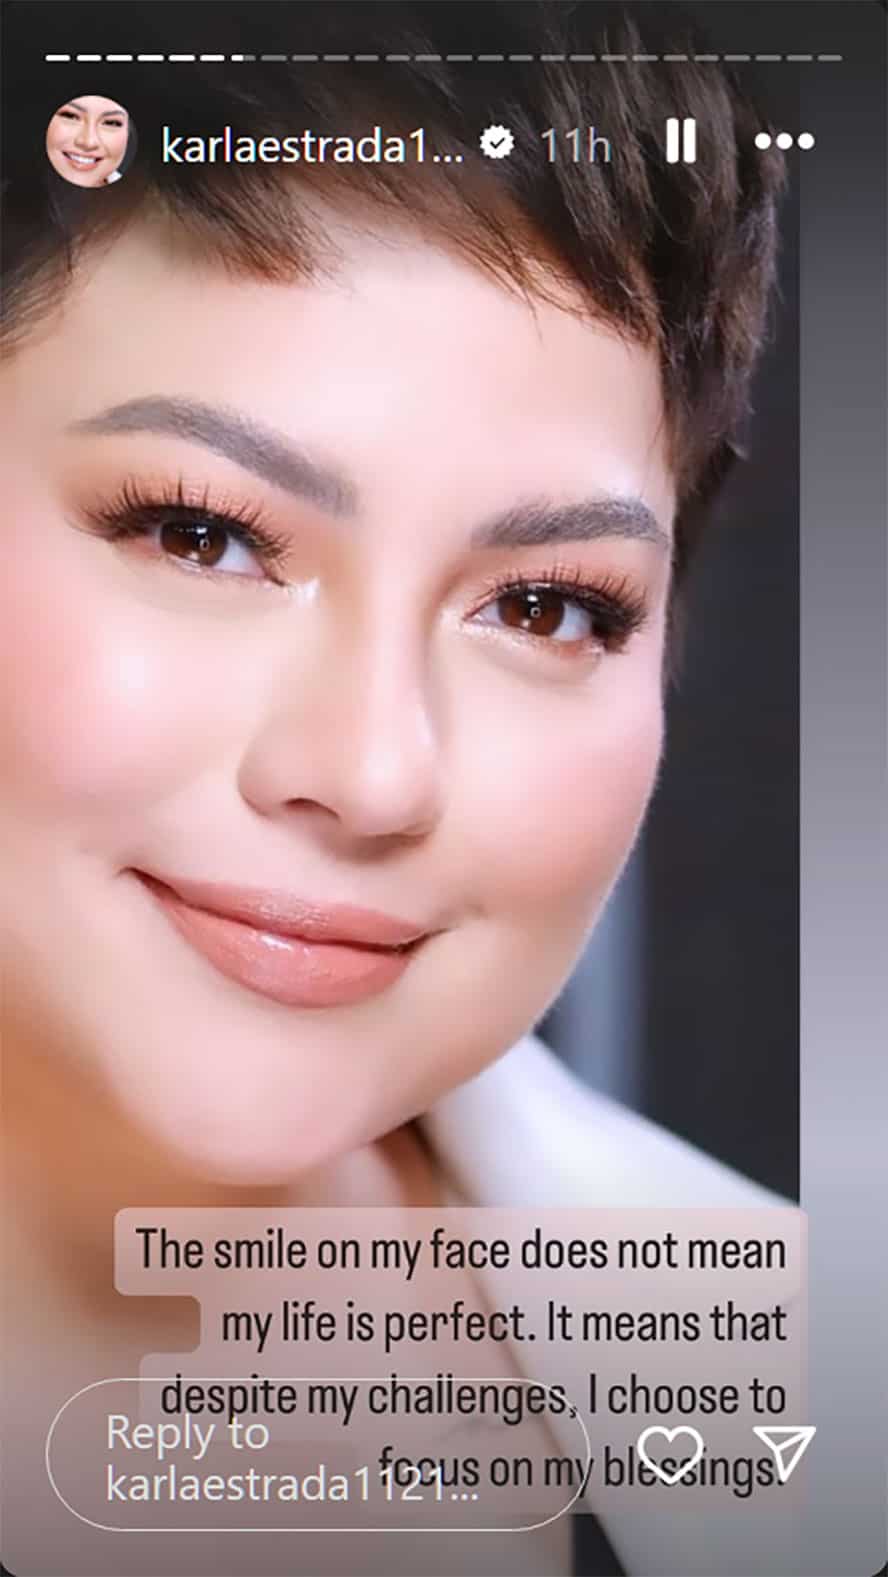 Karla Estrada, nag-post ng relatable message: "The smile on my face doesn’t mean my life is perfect"